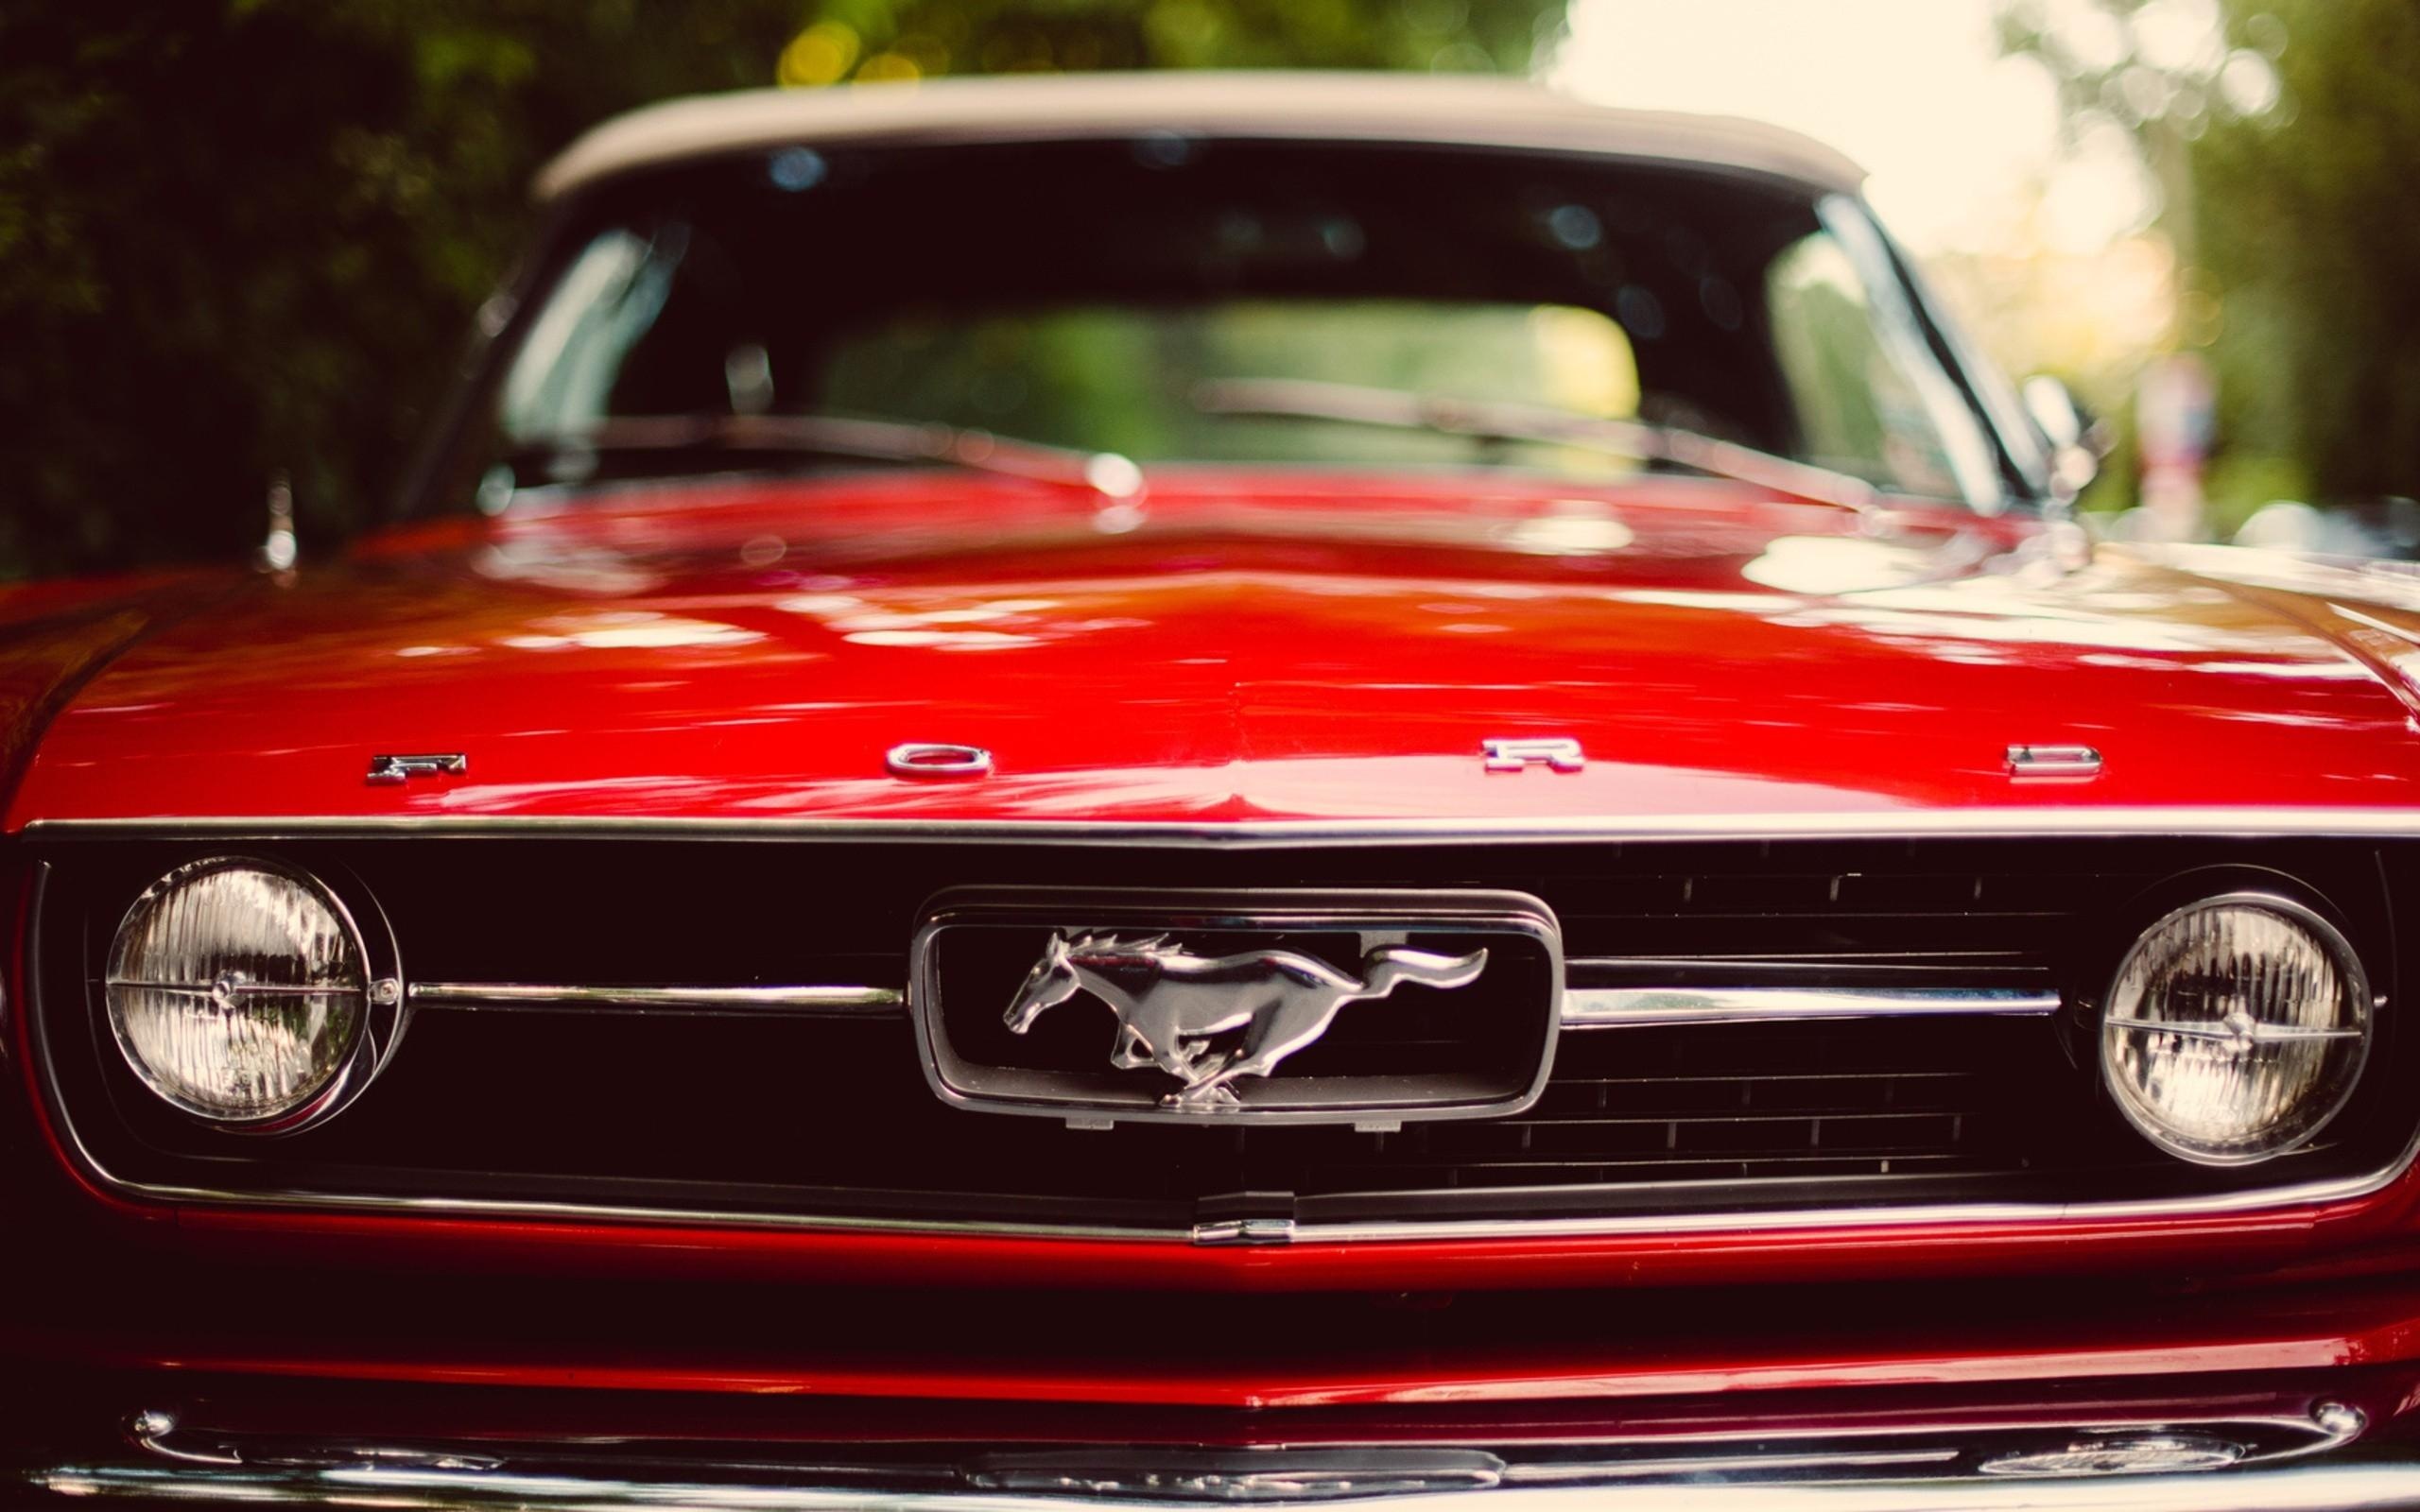 Ford Mustang, Vibrant red, Sports car, High definition, Fastback design, 2560x1600 HD Desktop